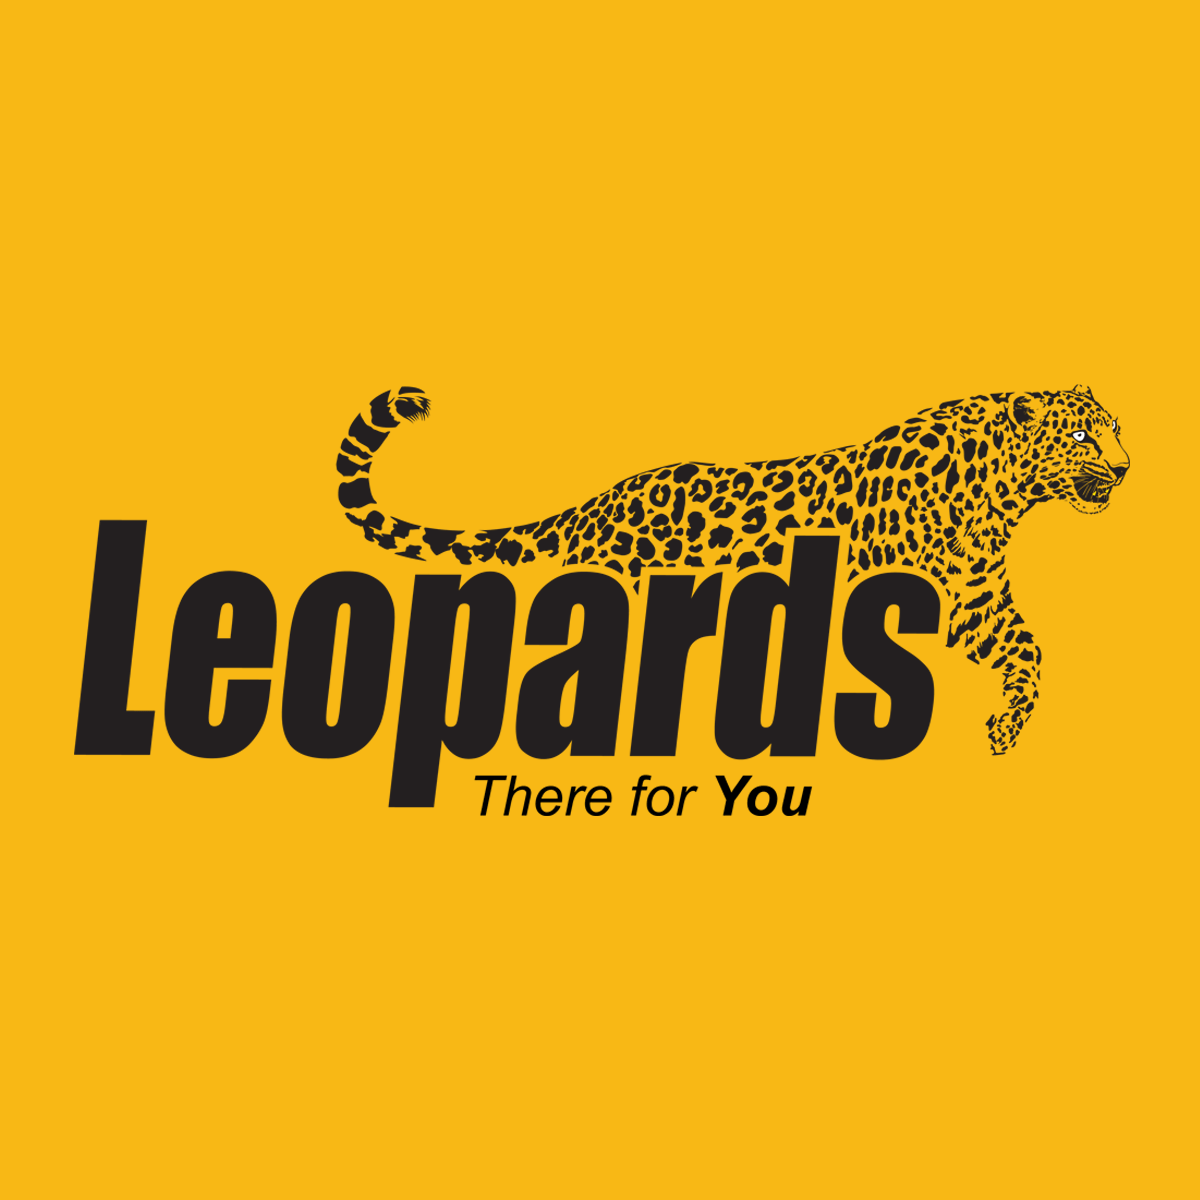 Hire Shopify Experts to integrate Leopards Courier app into a Shopify store